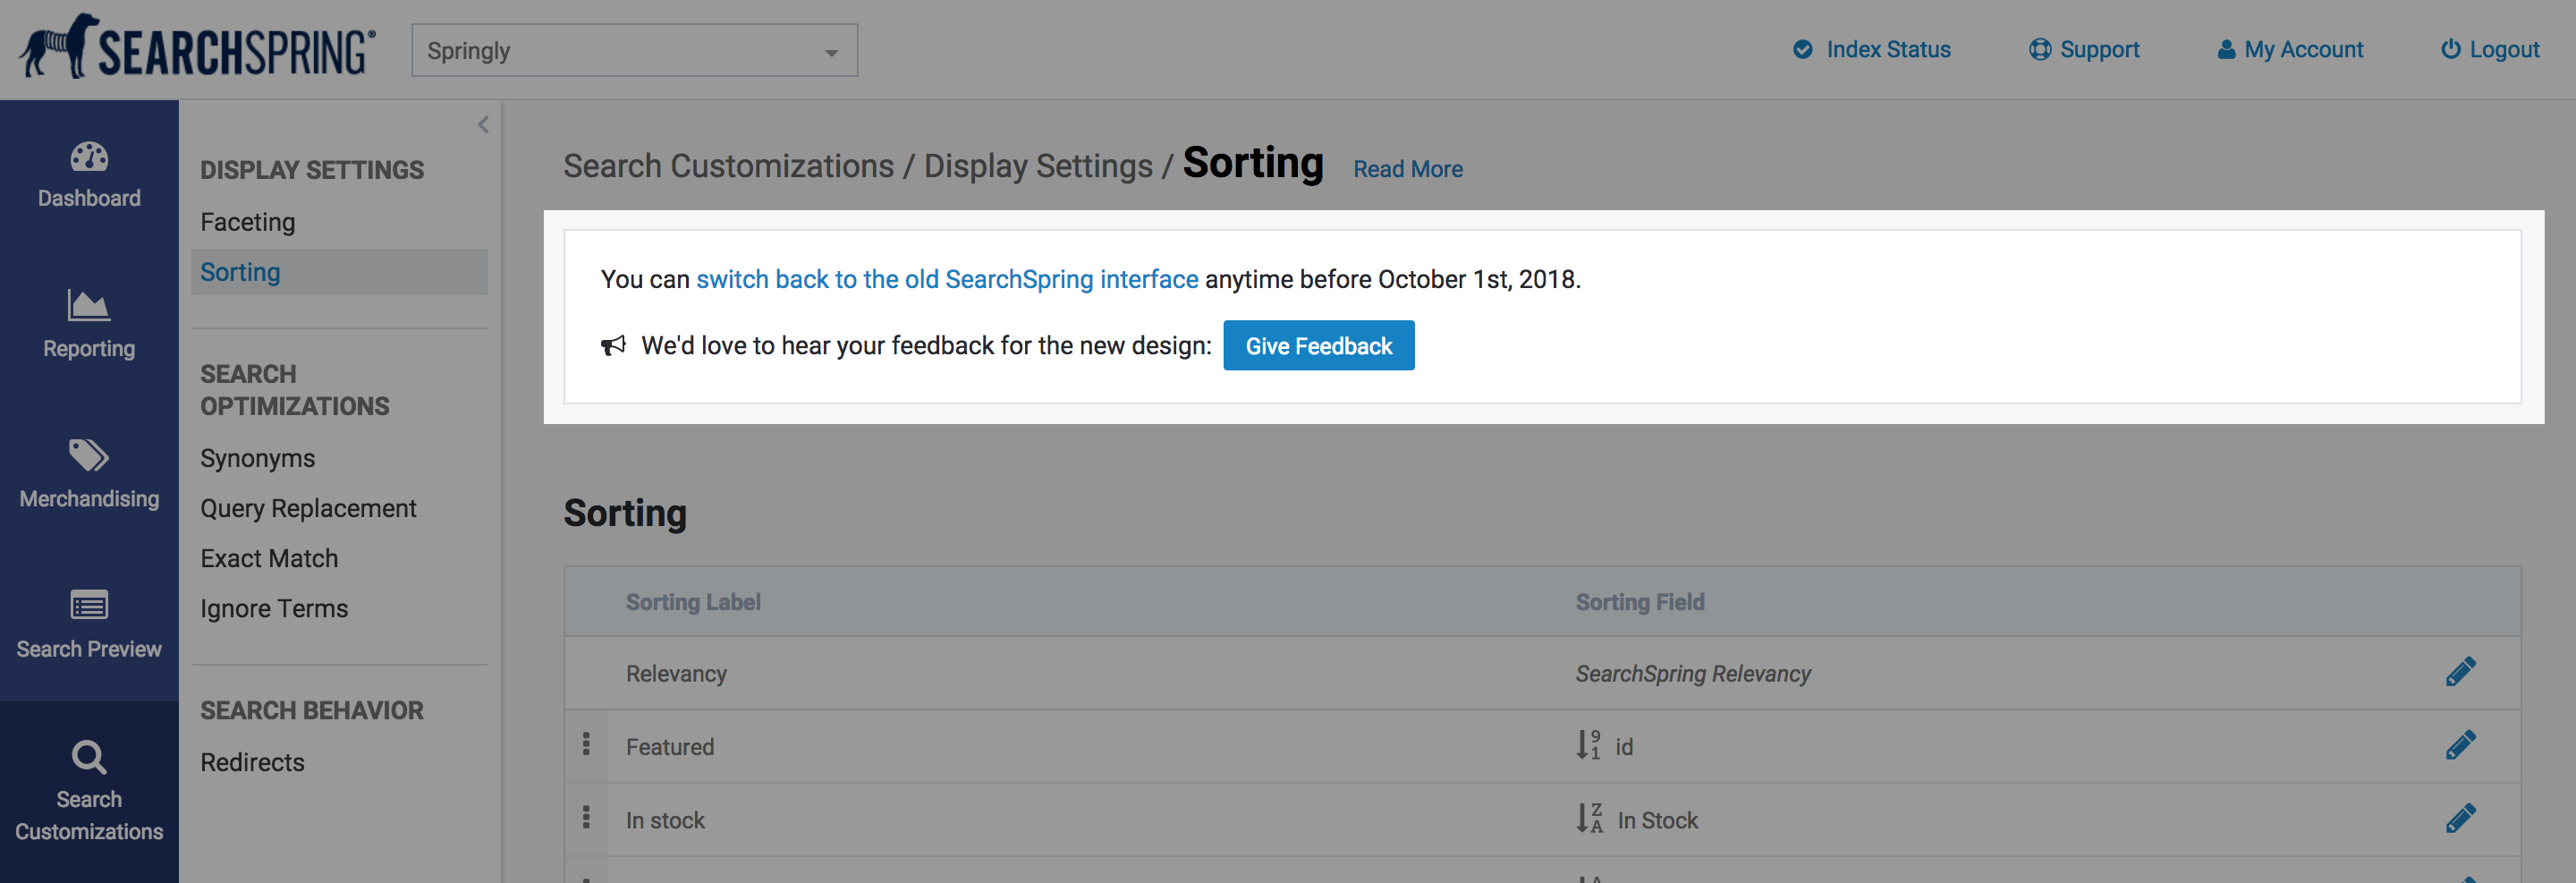 redesign searchspring managment console opt out